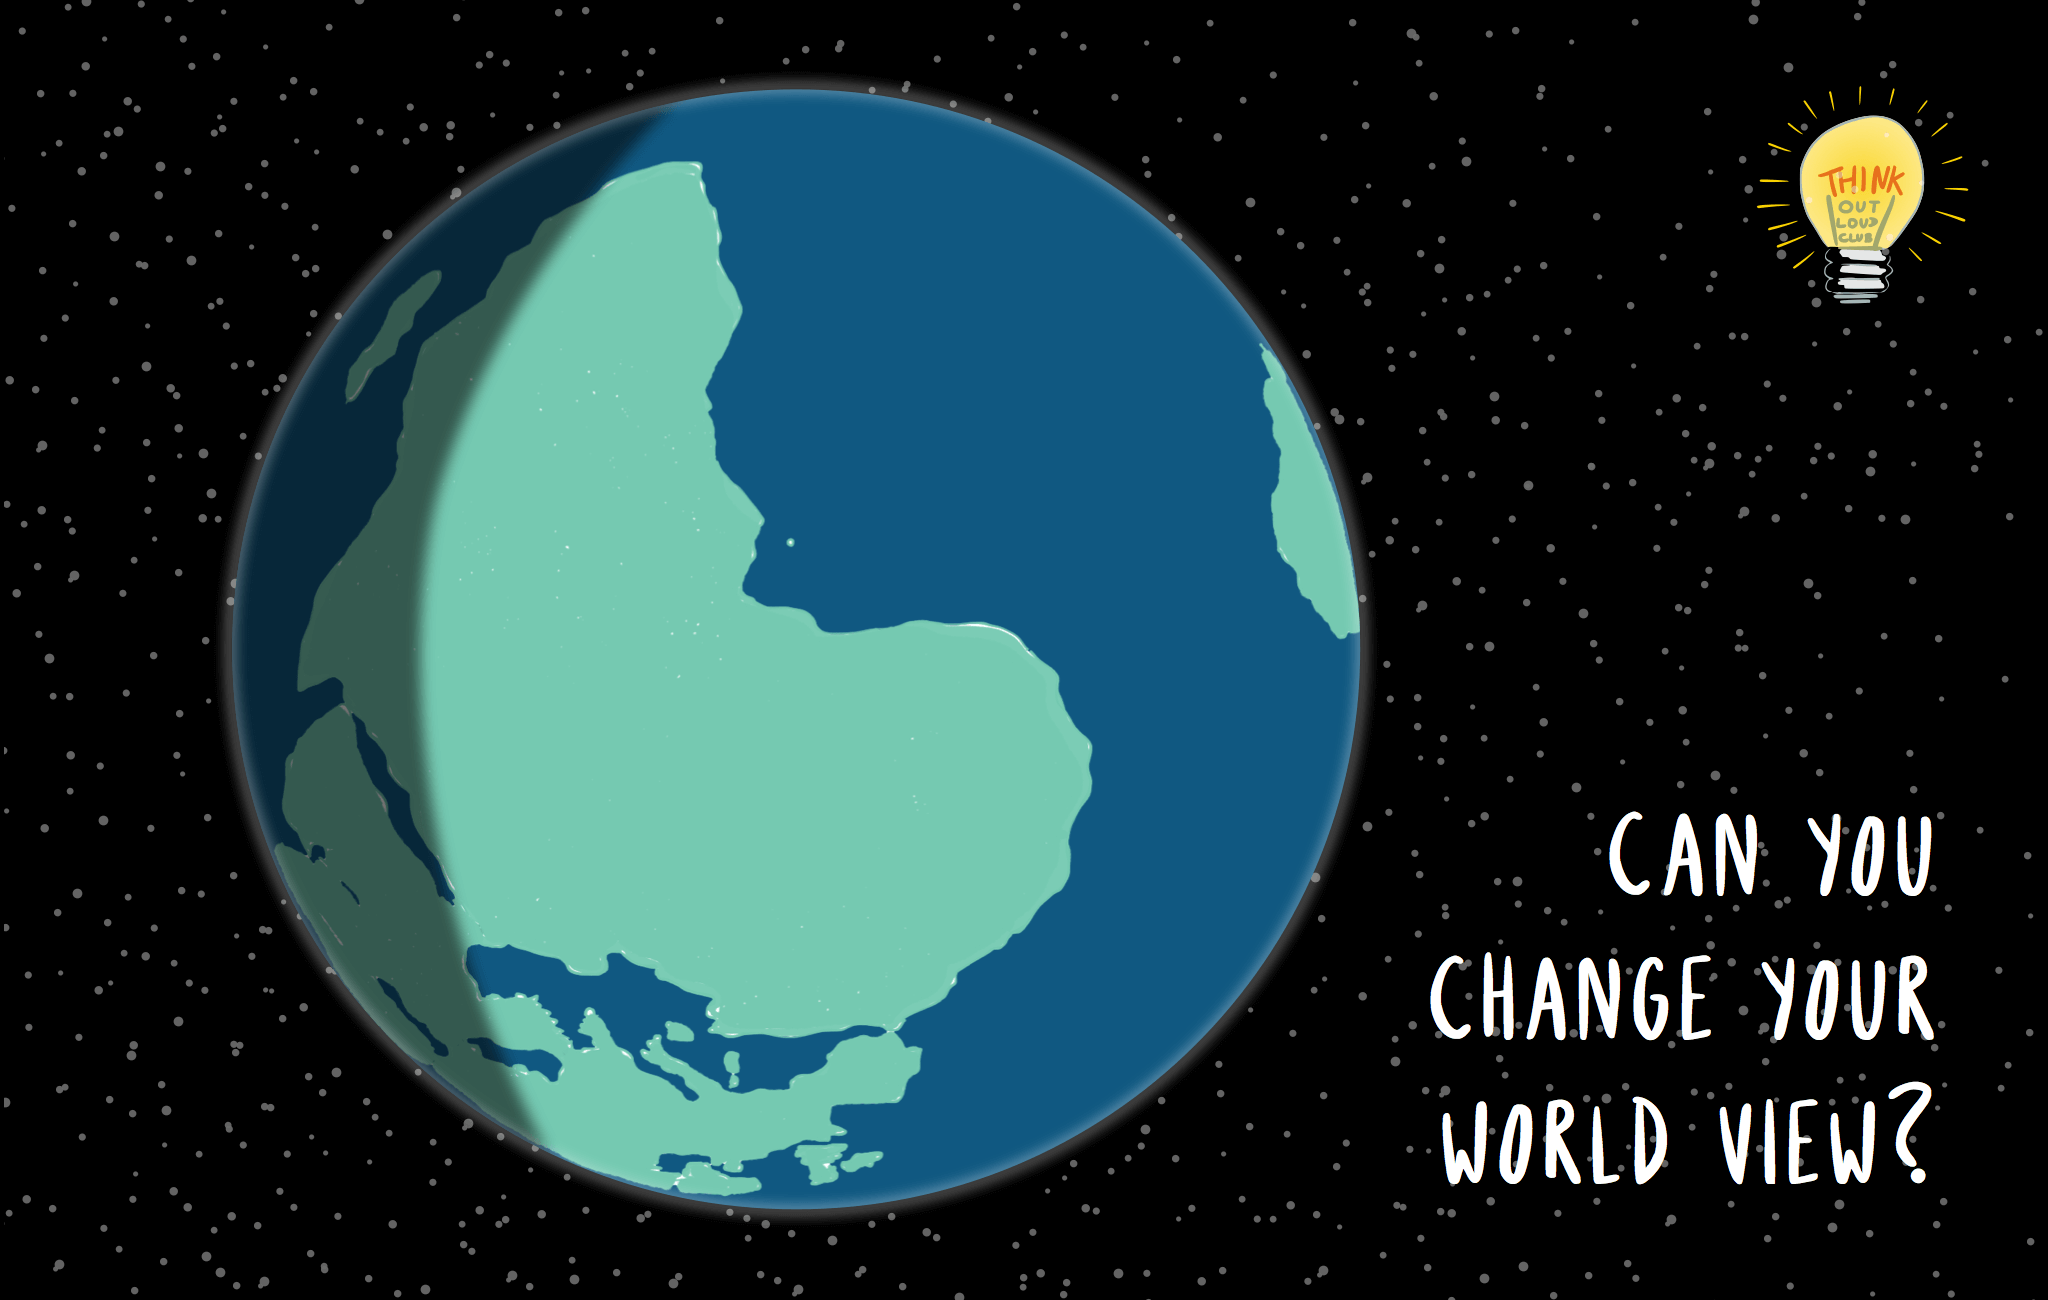 Changing your world view